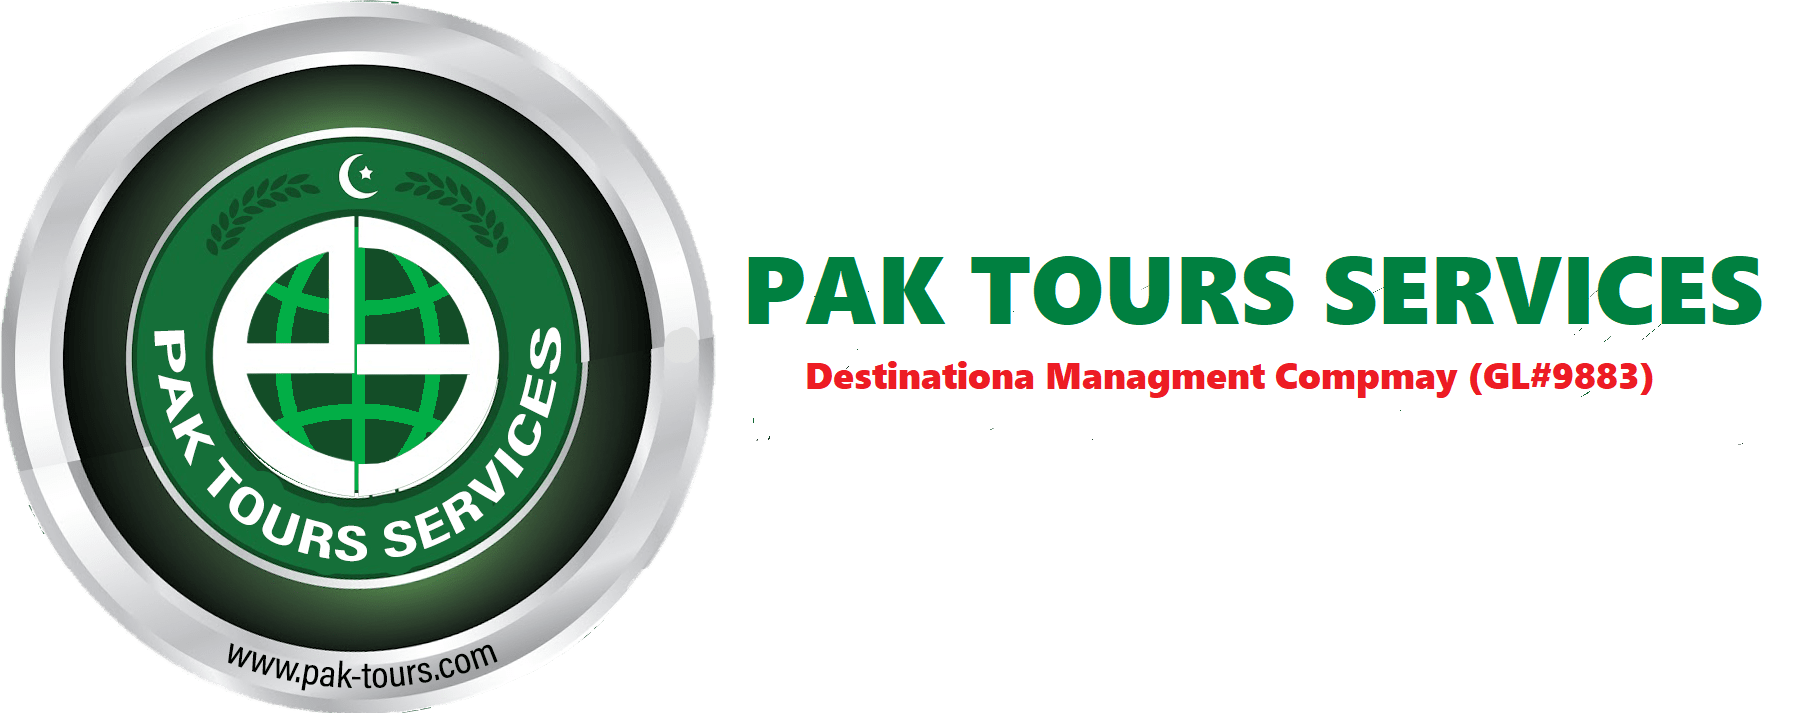 Your Trusted Travel Partner | Pakistan Tourism -A Complete Pakistan Travel Guide -